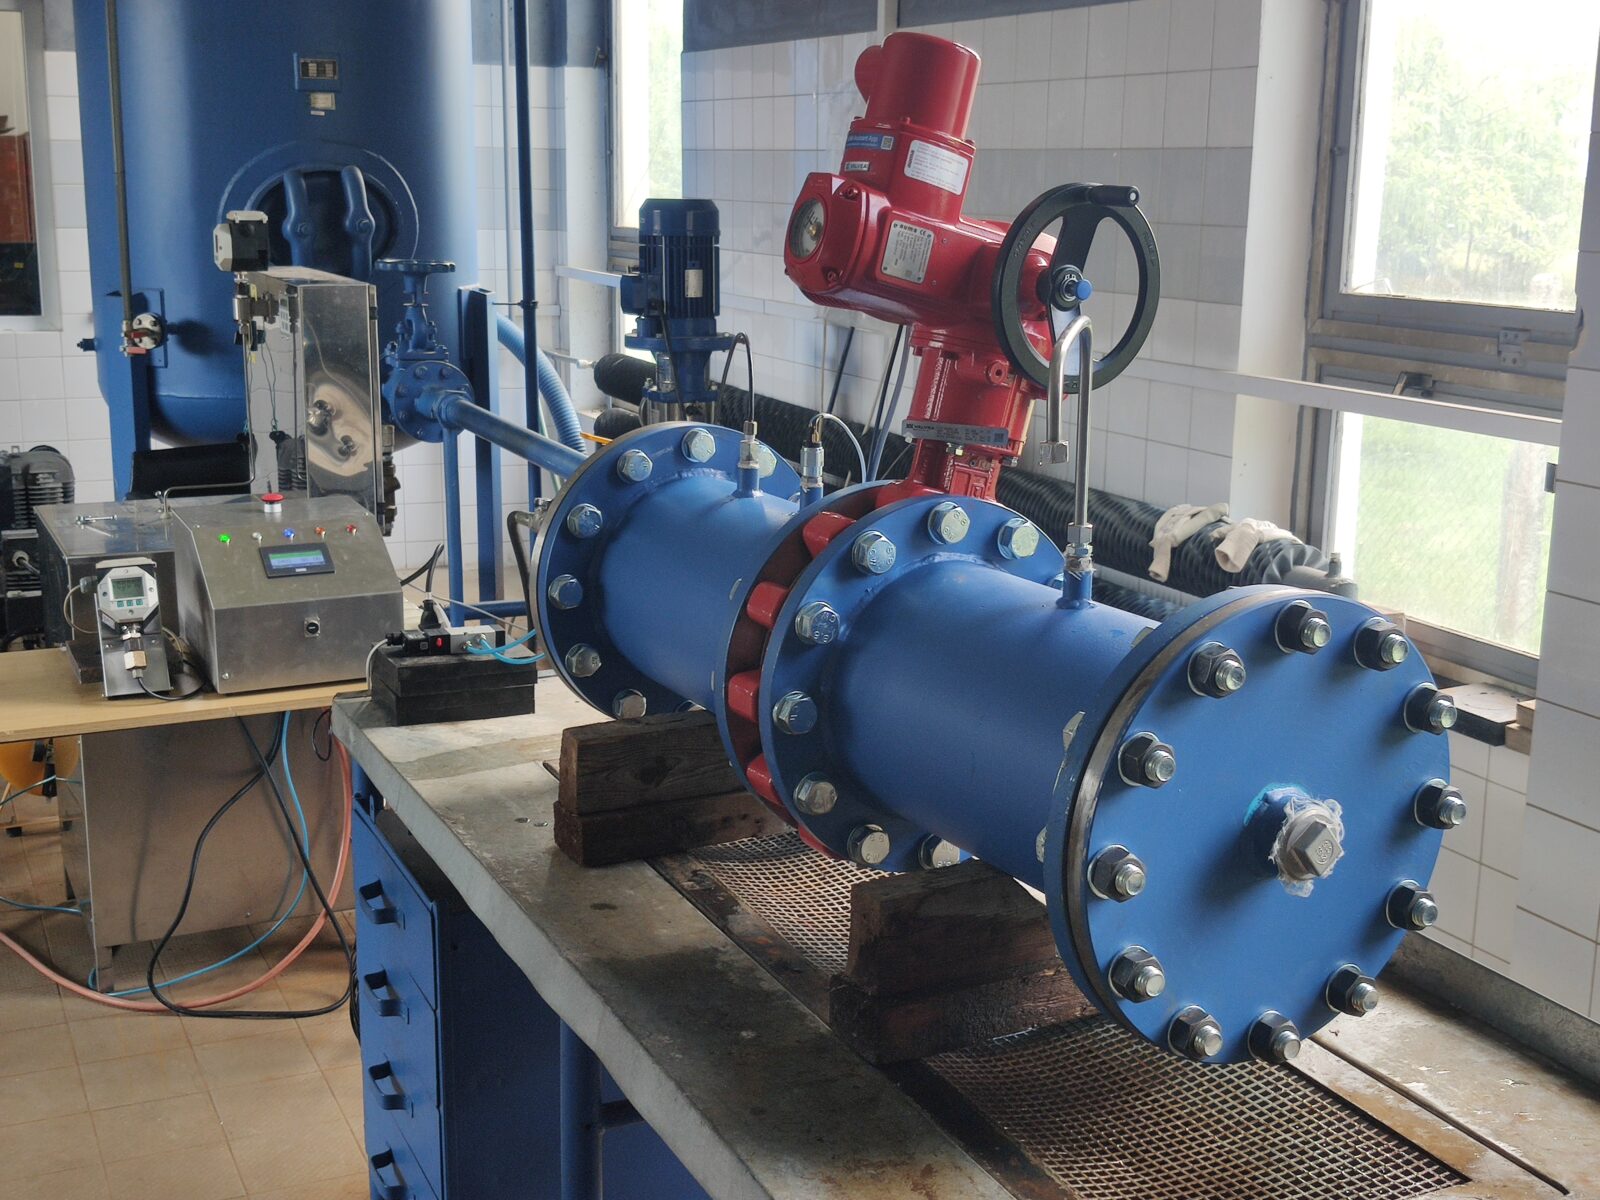 Successful certification of butterfly valves